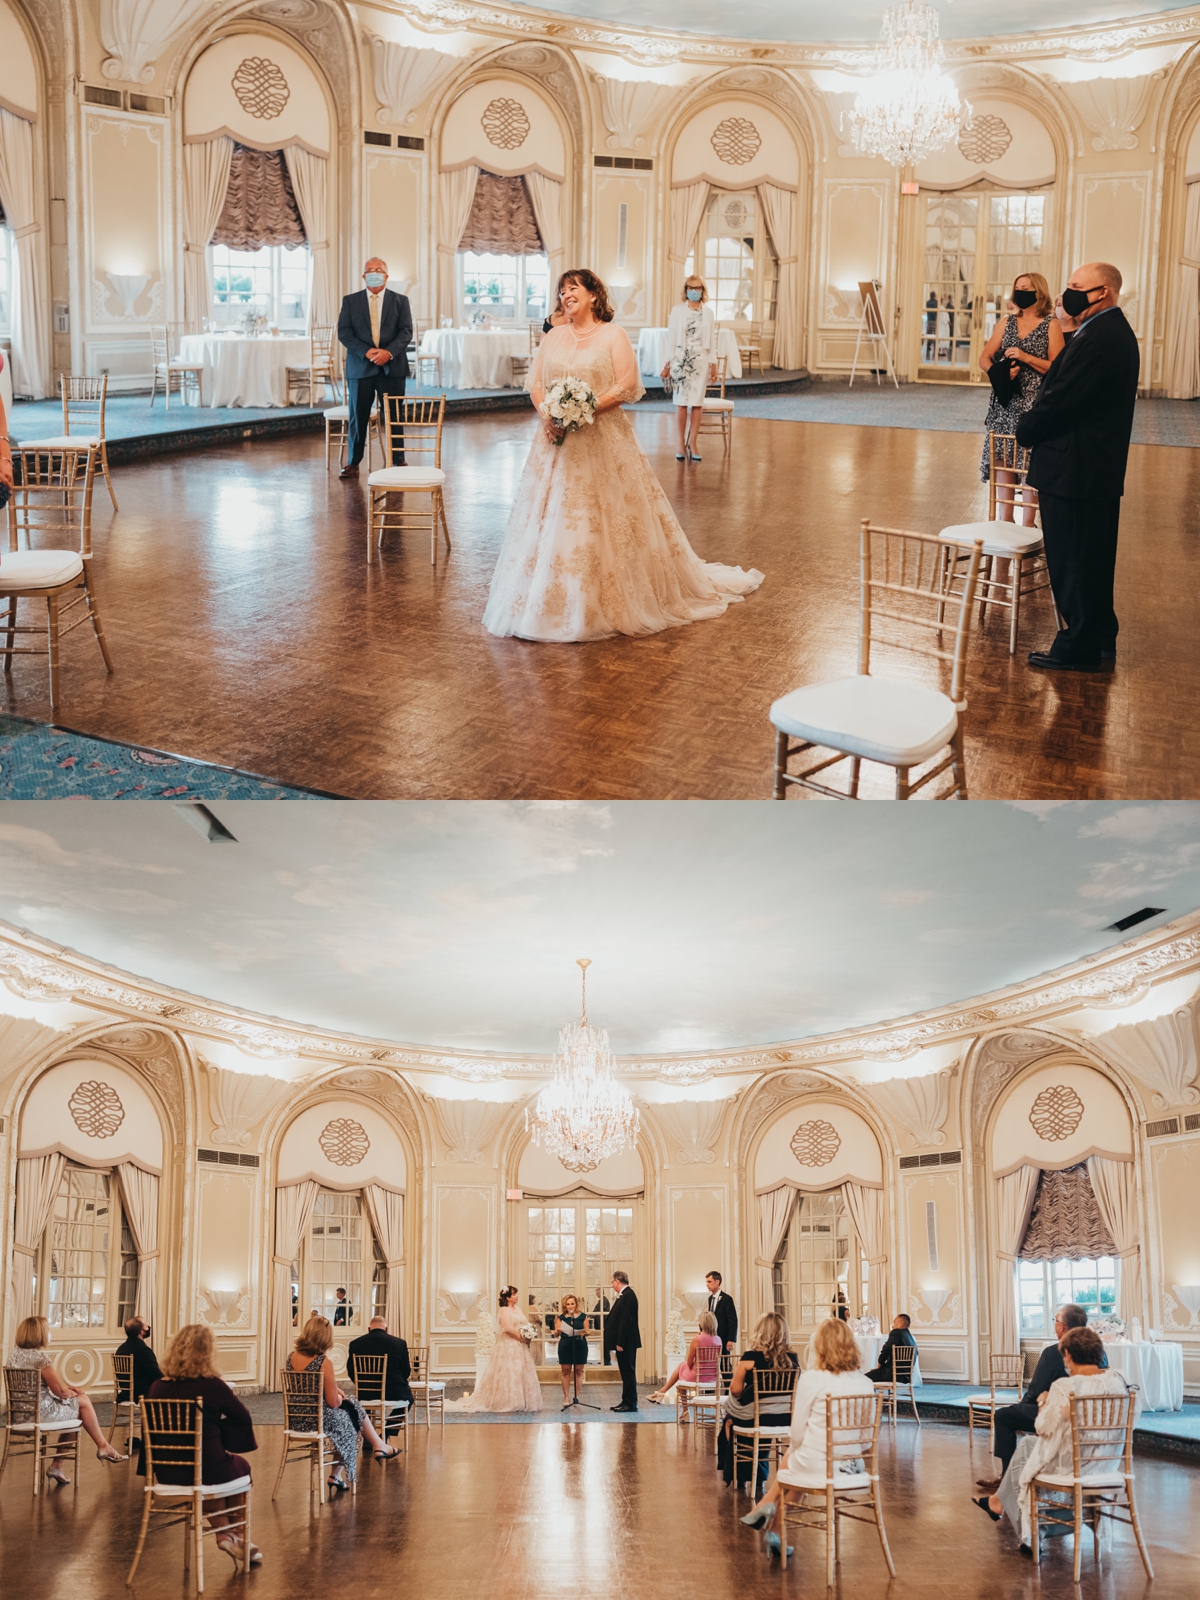 Wedding ceremony at The Fairmont Copley in Boston